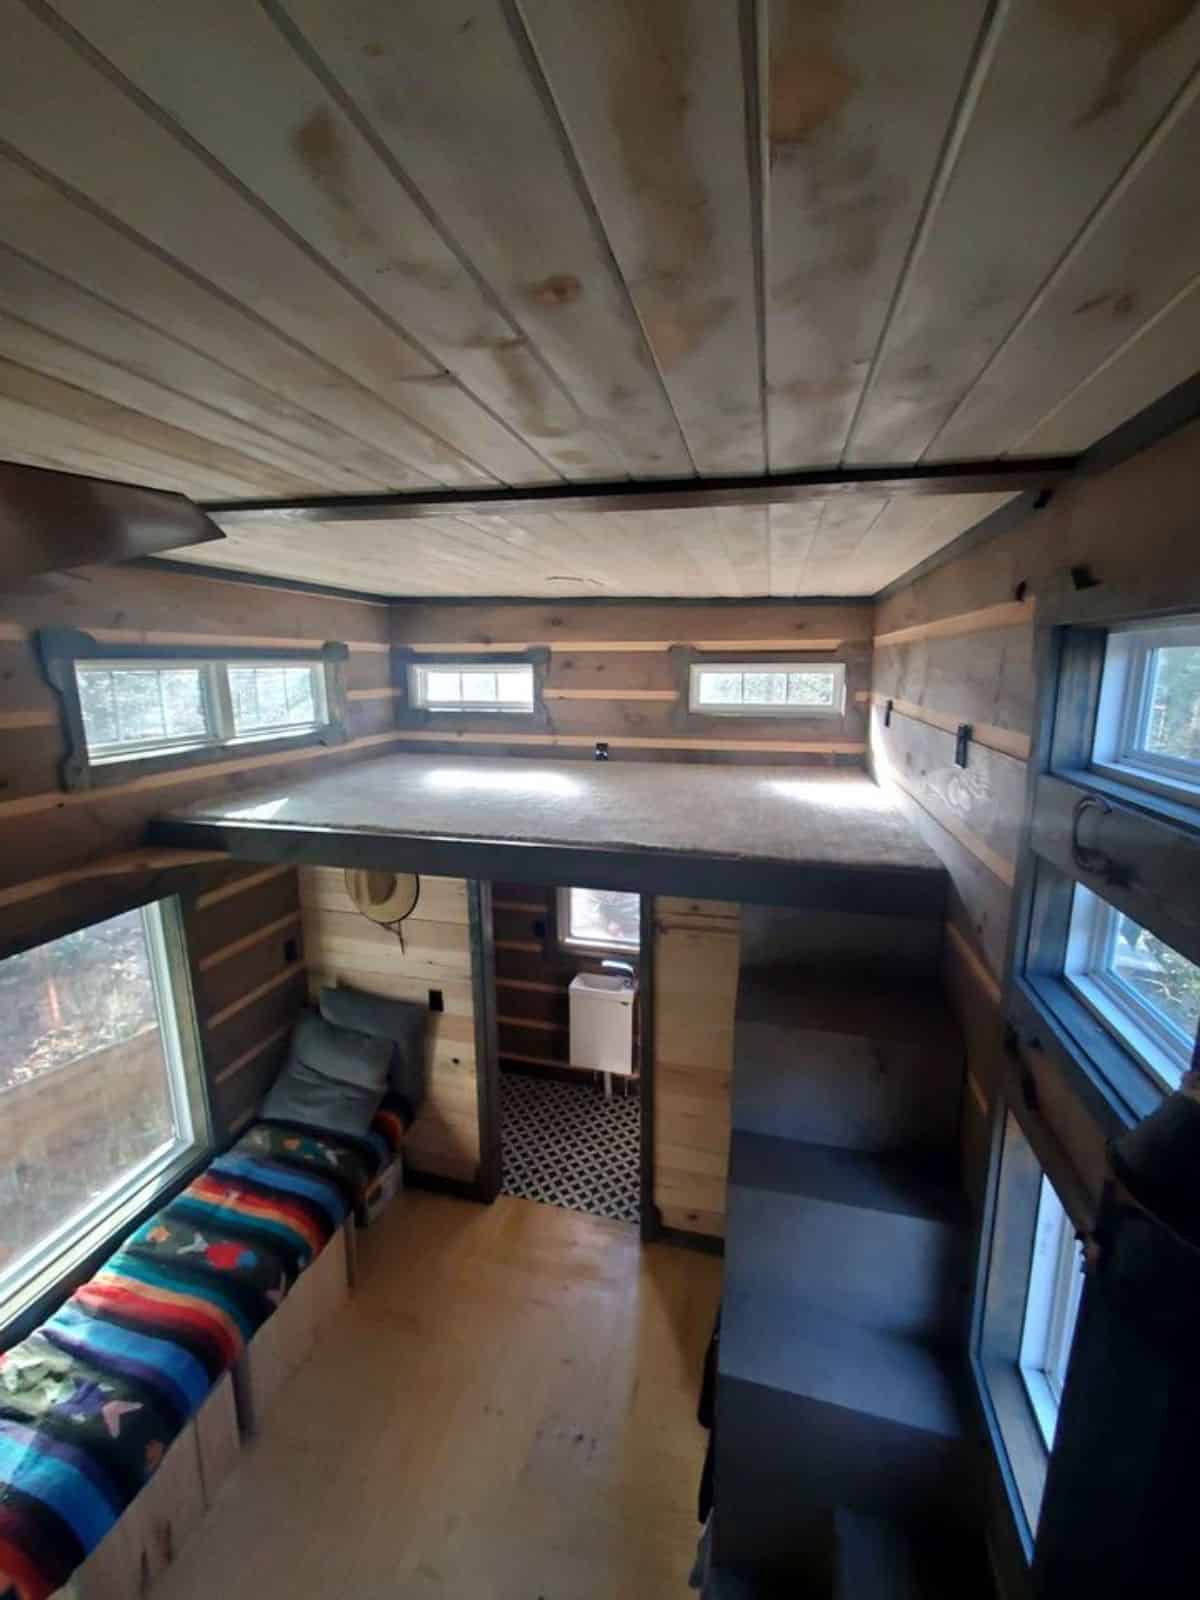 huge ceiling of offgrid tiny home